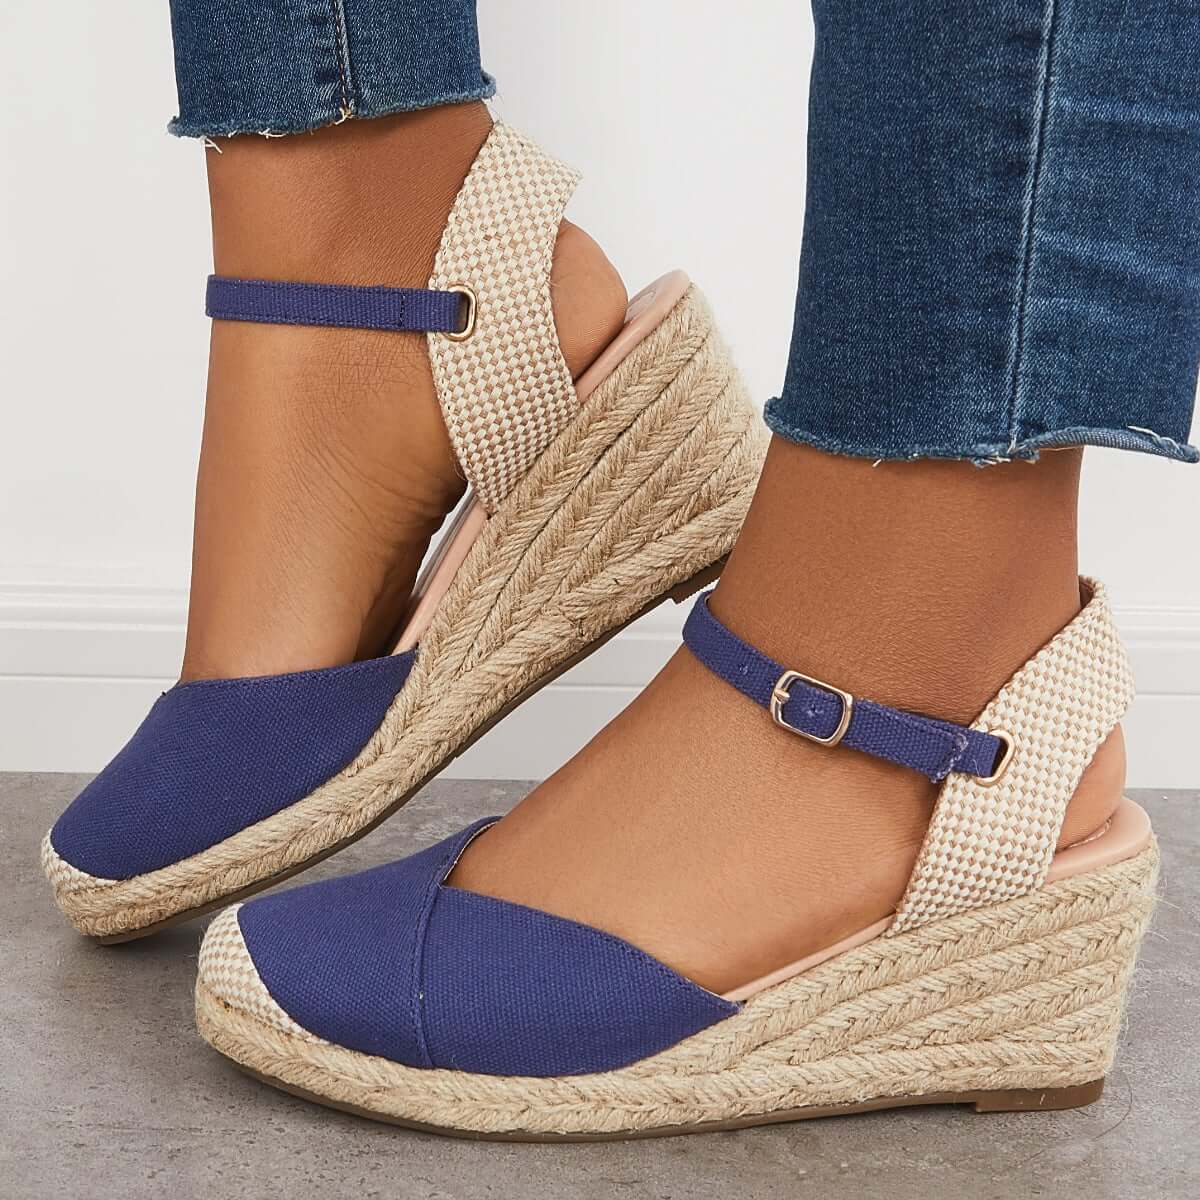 Cosypairs Closed Toe Espadrilles Wedge Ankle Strap Sandals